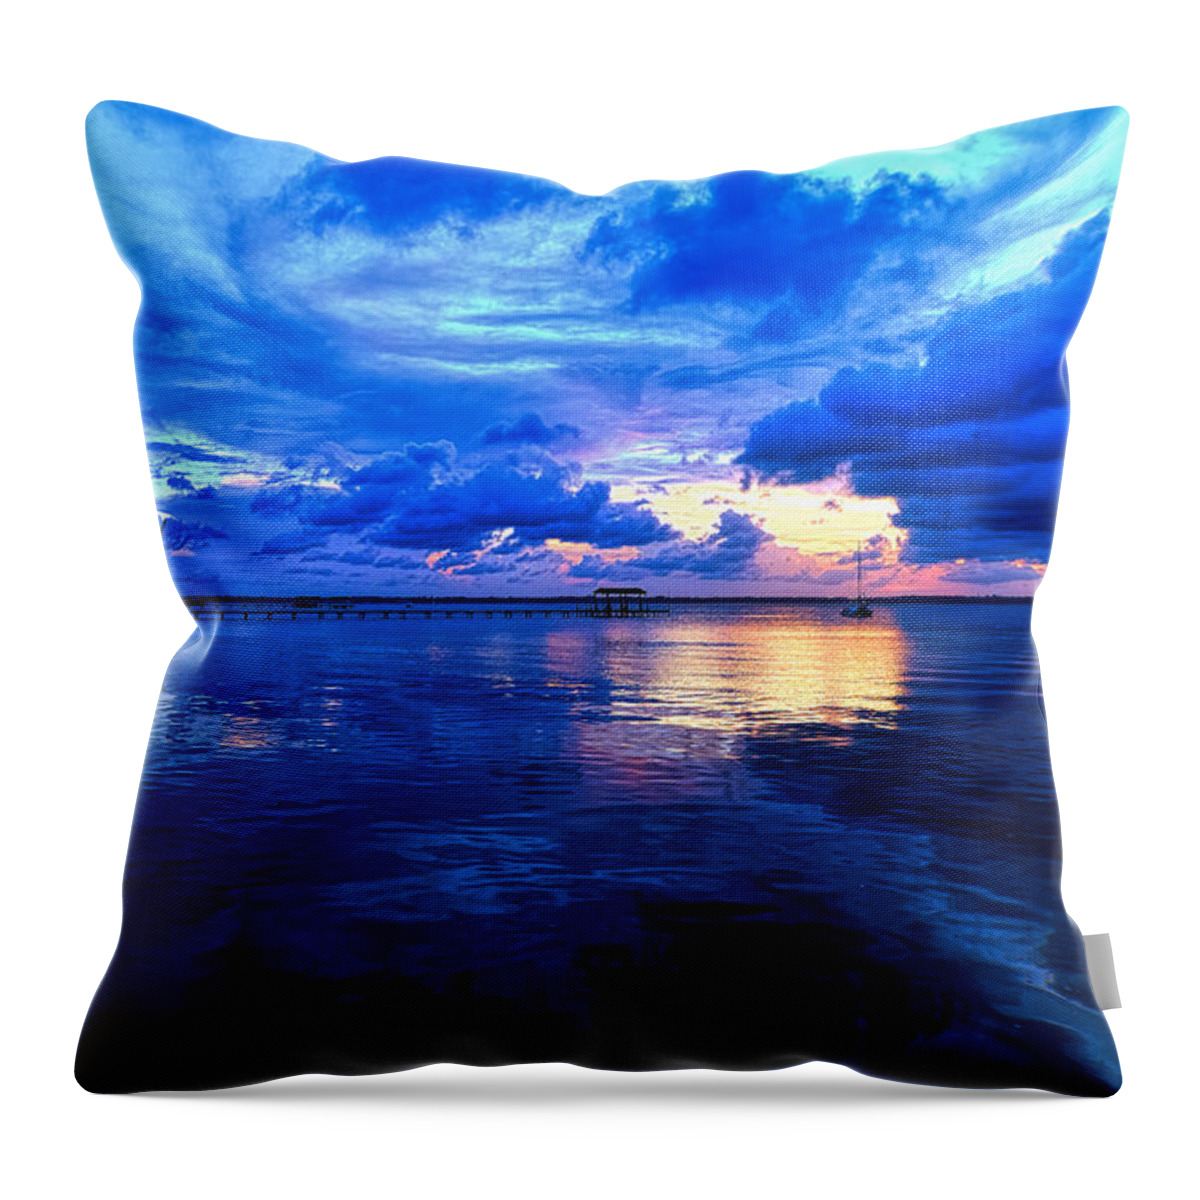 Saint Johns River Throw Pillow featuring the photograph Blazing Blue Sunset by Anthony Baatz